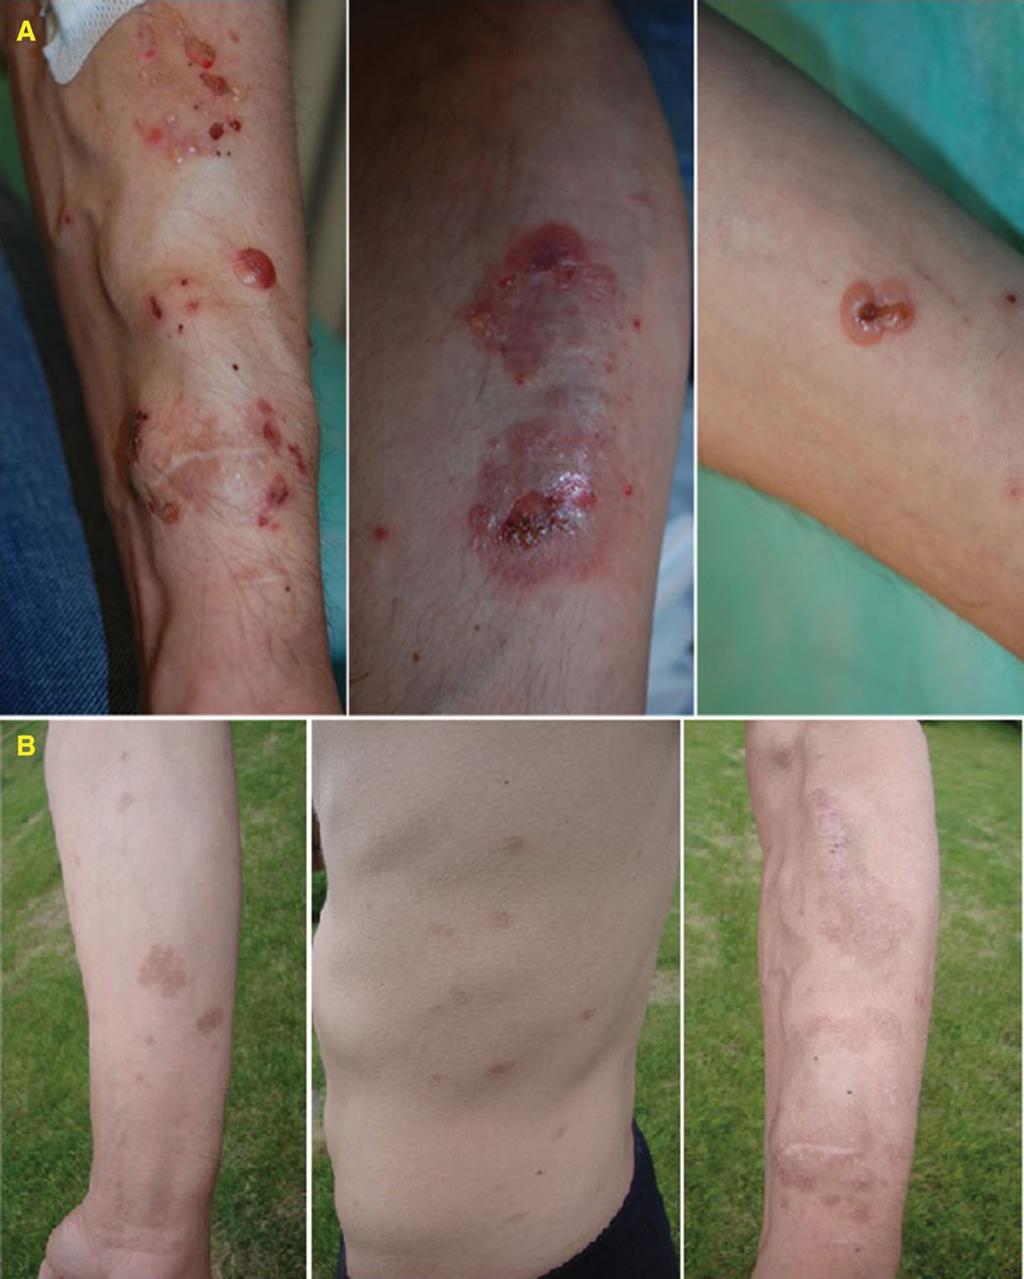 K. Osipowicz et al. Bullous pemphigoid and haemodialysis Figure 1 Clinical characterisation of the current patient. (A) Tense blisters located on the forearms before treatment, (B) after treatment.